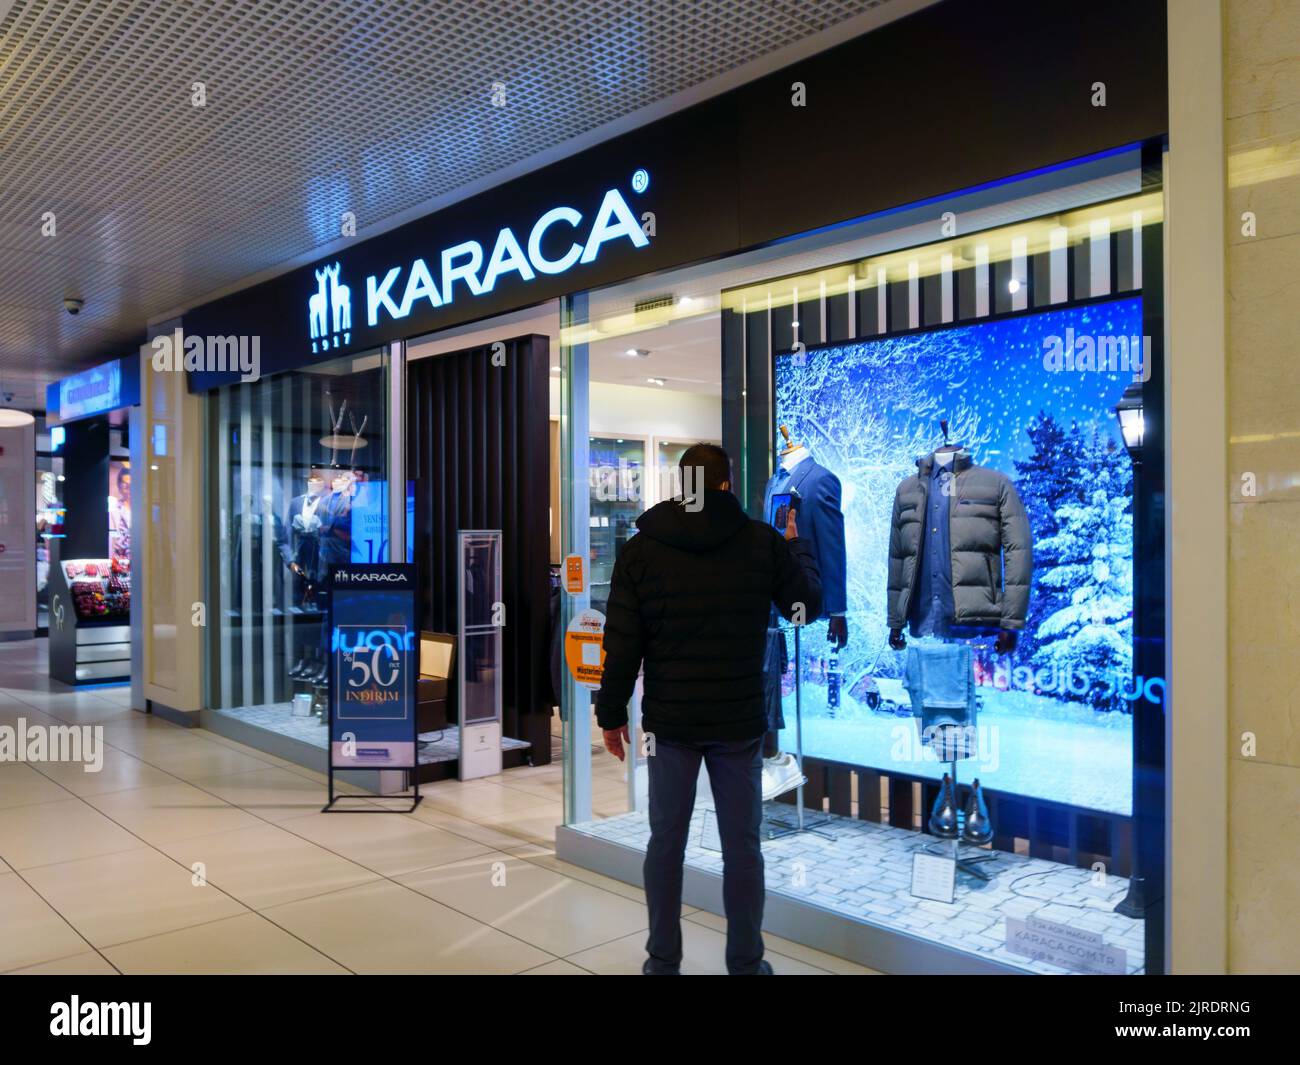 Fatih, Istanbul - Mar 23, 2022: Landscape View of Karaca Ready Wear Store. It was Founded in Bandirma in 1917 Exporting to Europe and the Middle East Stock Photo